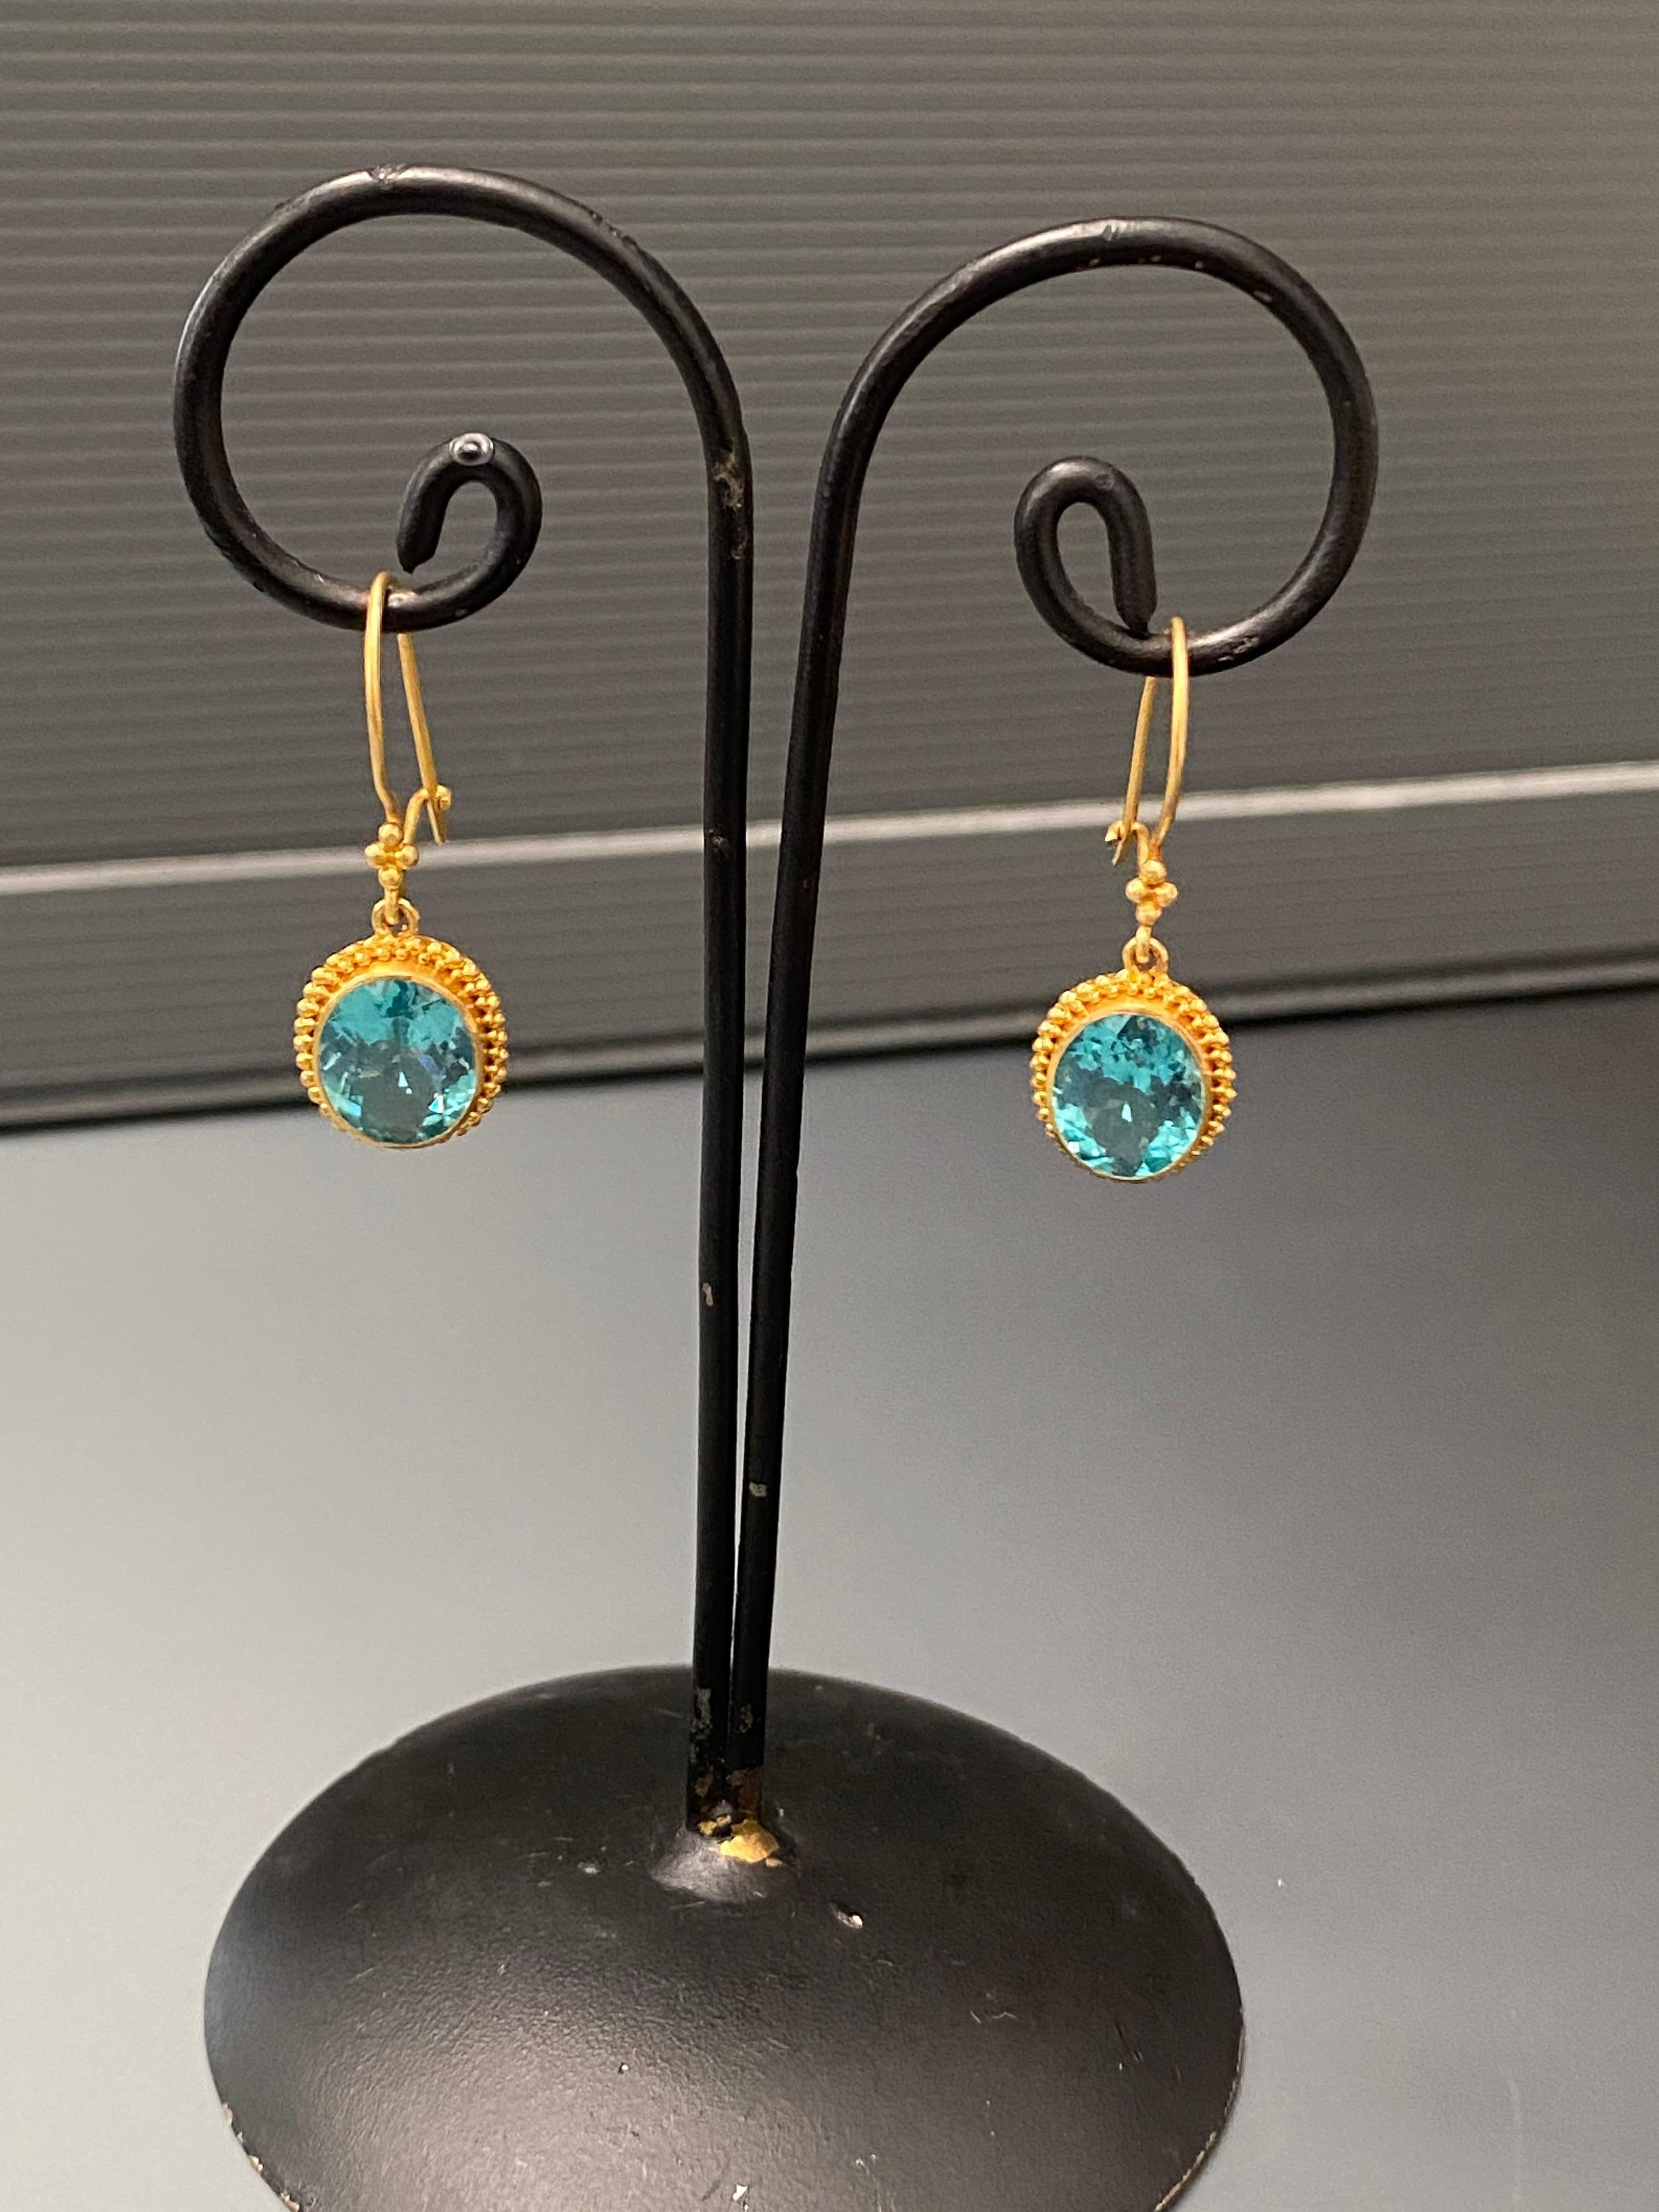 Ancient inspired drop earrings handcrafted in a beautiful granulated 22K setting.  
5.5 Carats of brilliant Brazilian apatite. The safety clasps provide security when worn.
Length is 33mm.  Total weight 3.3 5 grams
Stone size 8x10mm oval faceted. 
